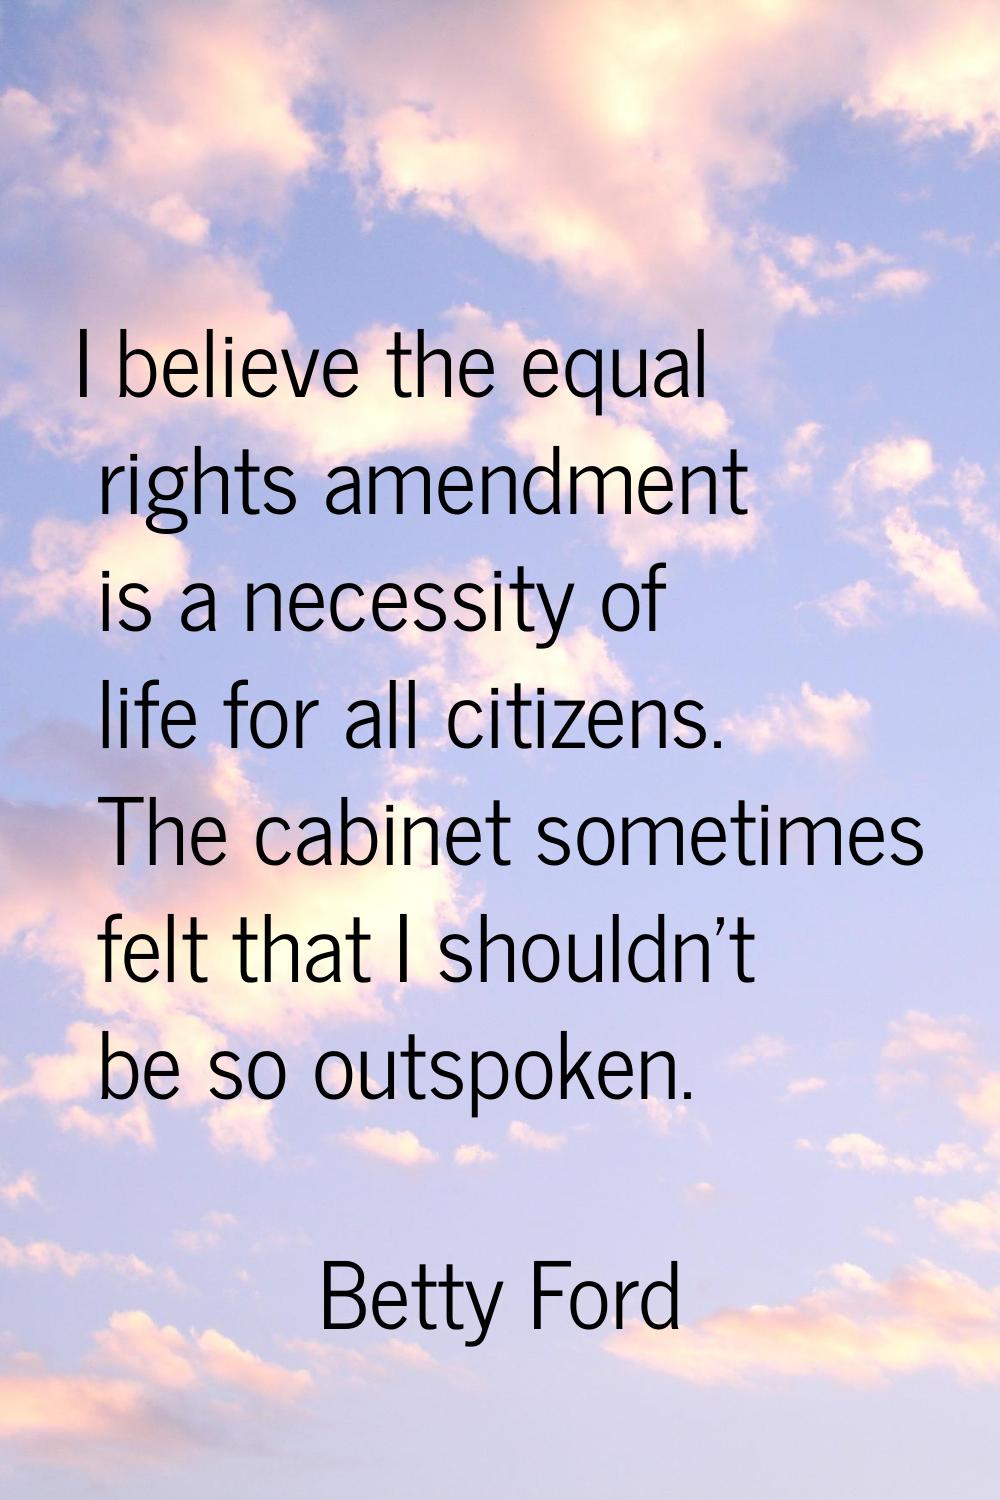 I believe the equal rights amendment is a necessity of life for all citizens. The cabinet sometimes